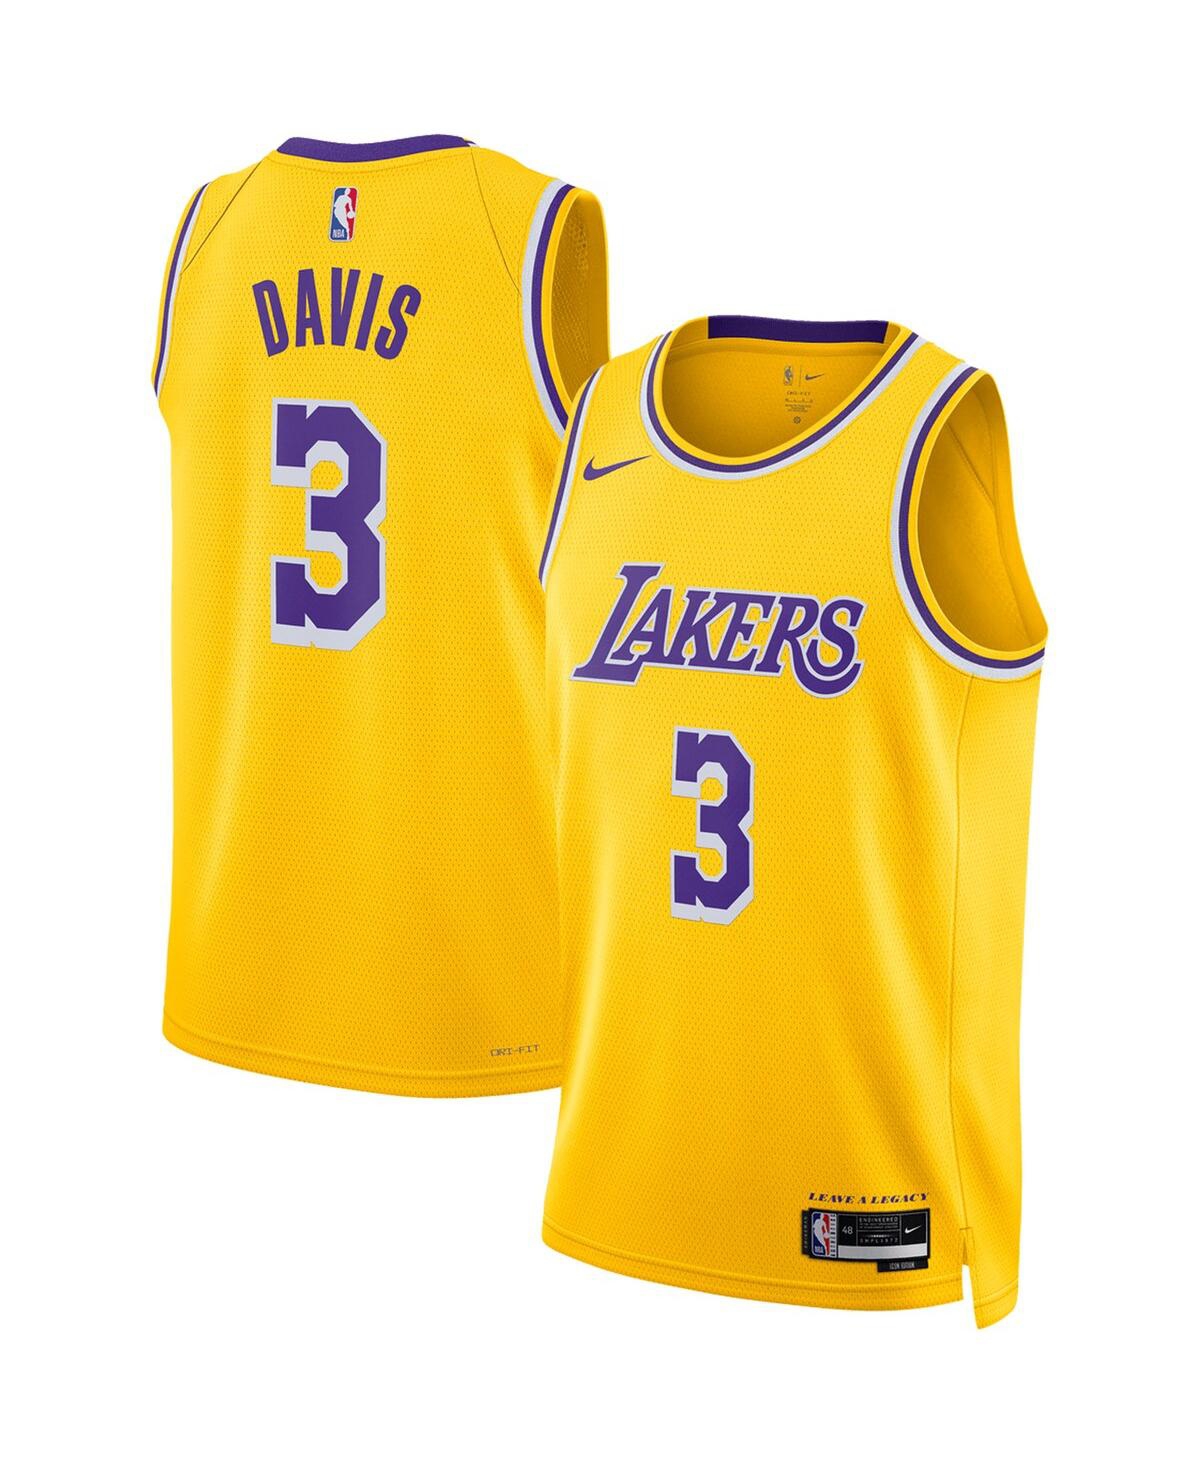 Men's and Women's Nike Anthony Davis Gold Los Angeles Lakers Swingman Jersey - Icon Edition - Gold